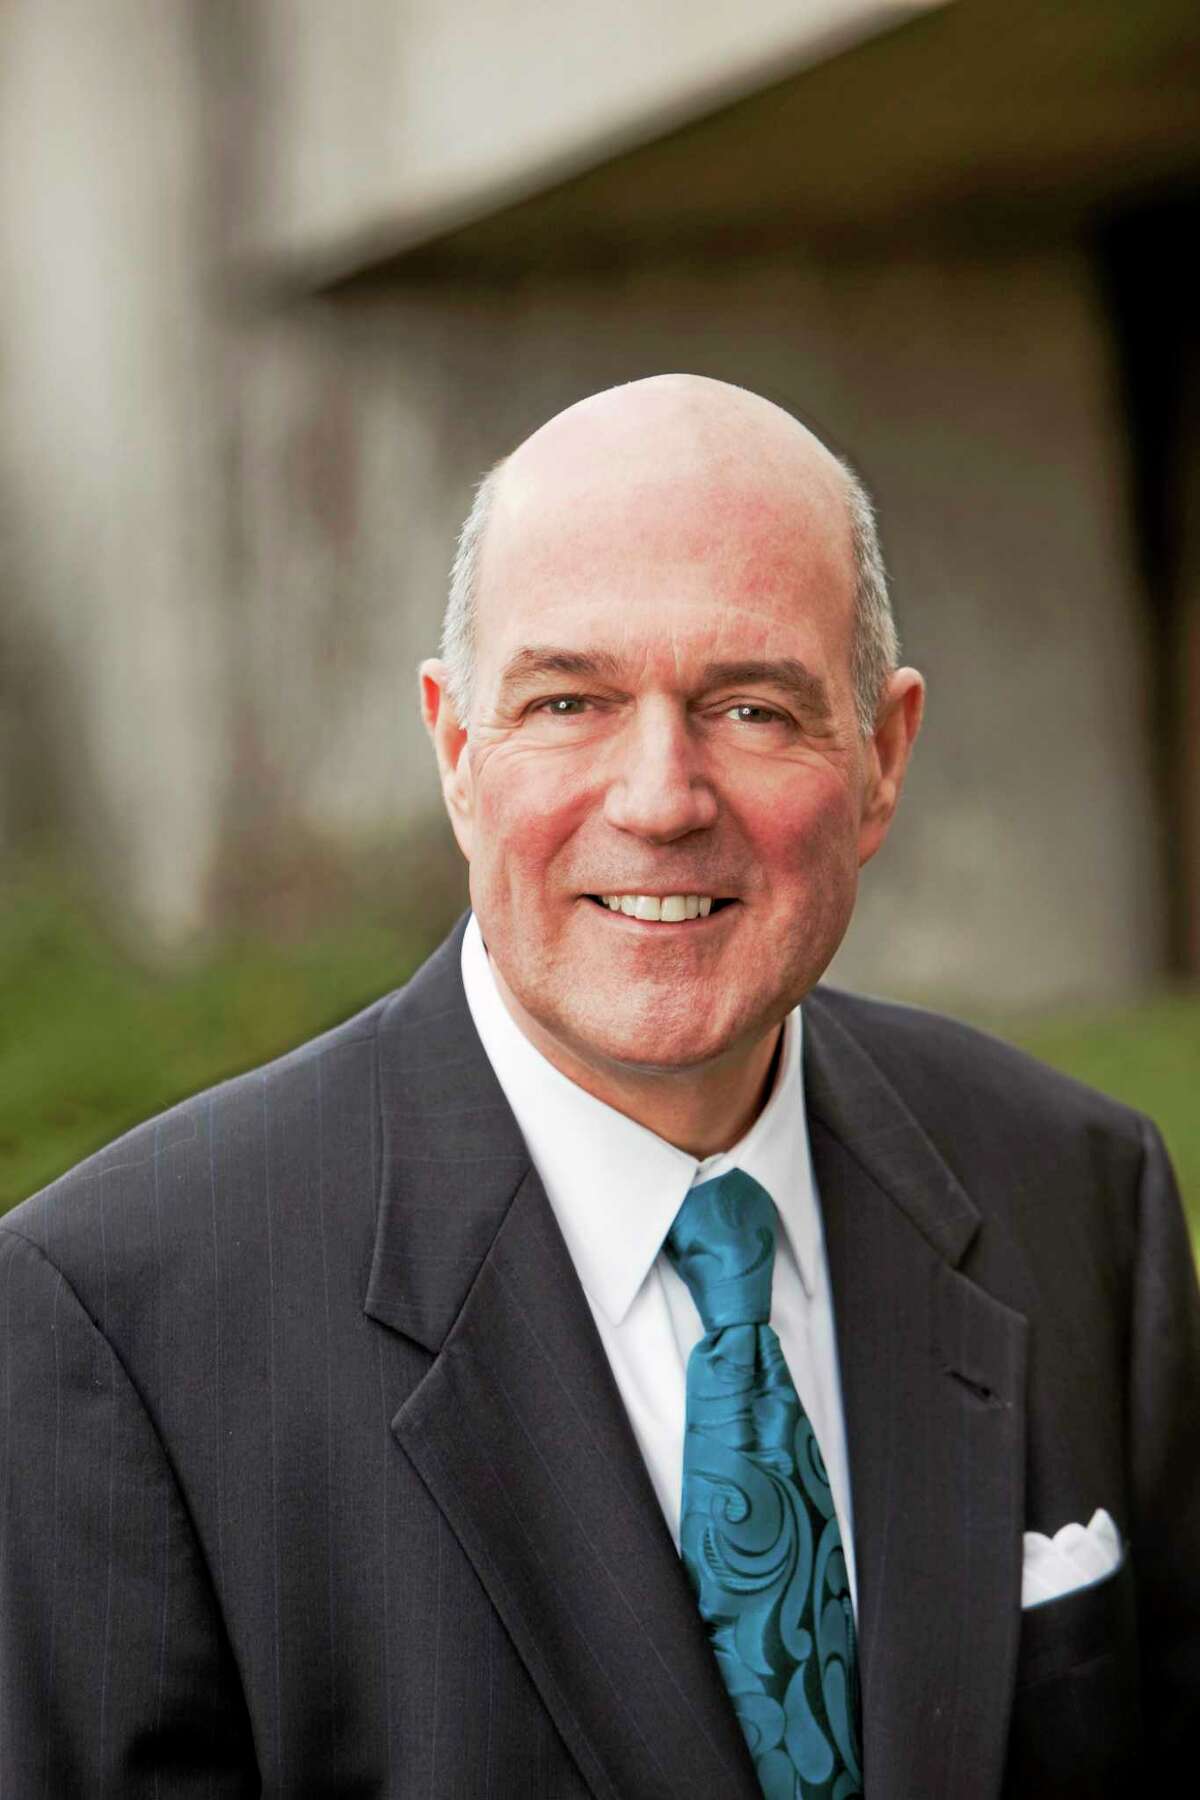 Larry L. Bingaman, president and CEO of the South Central Connecticut Regional Water Authority